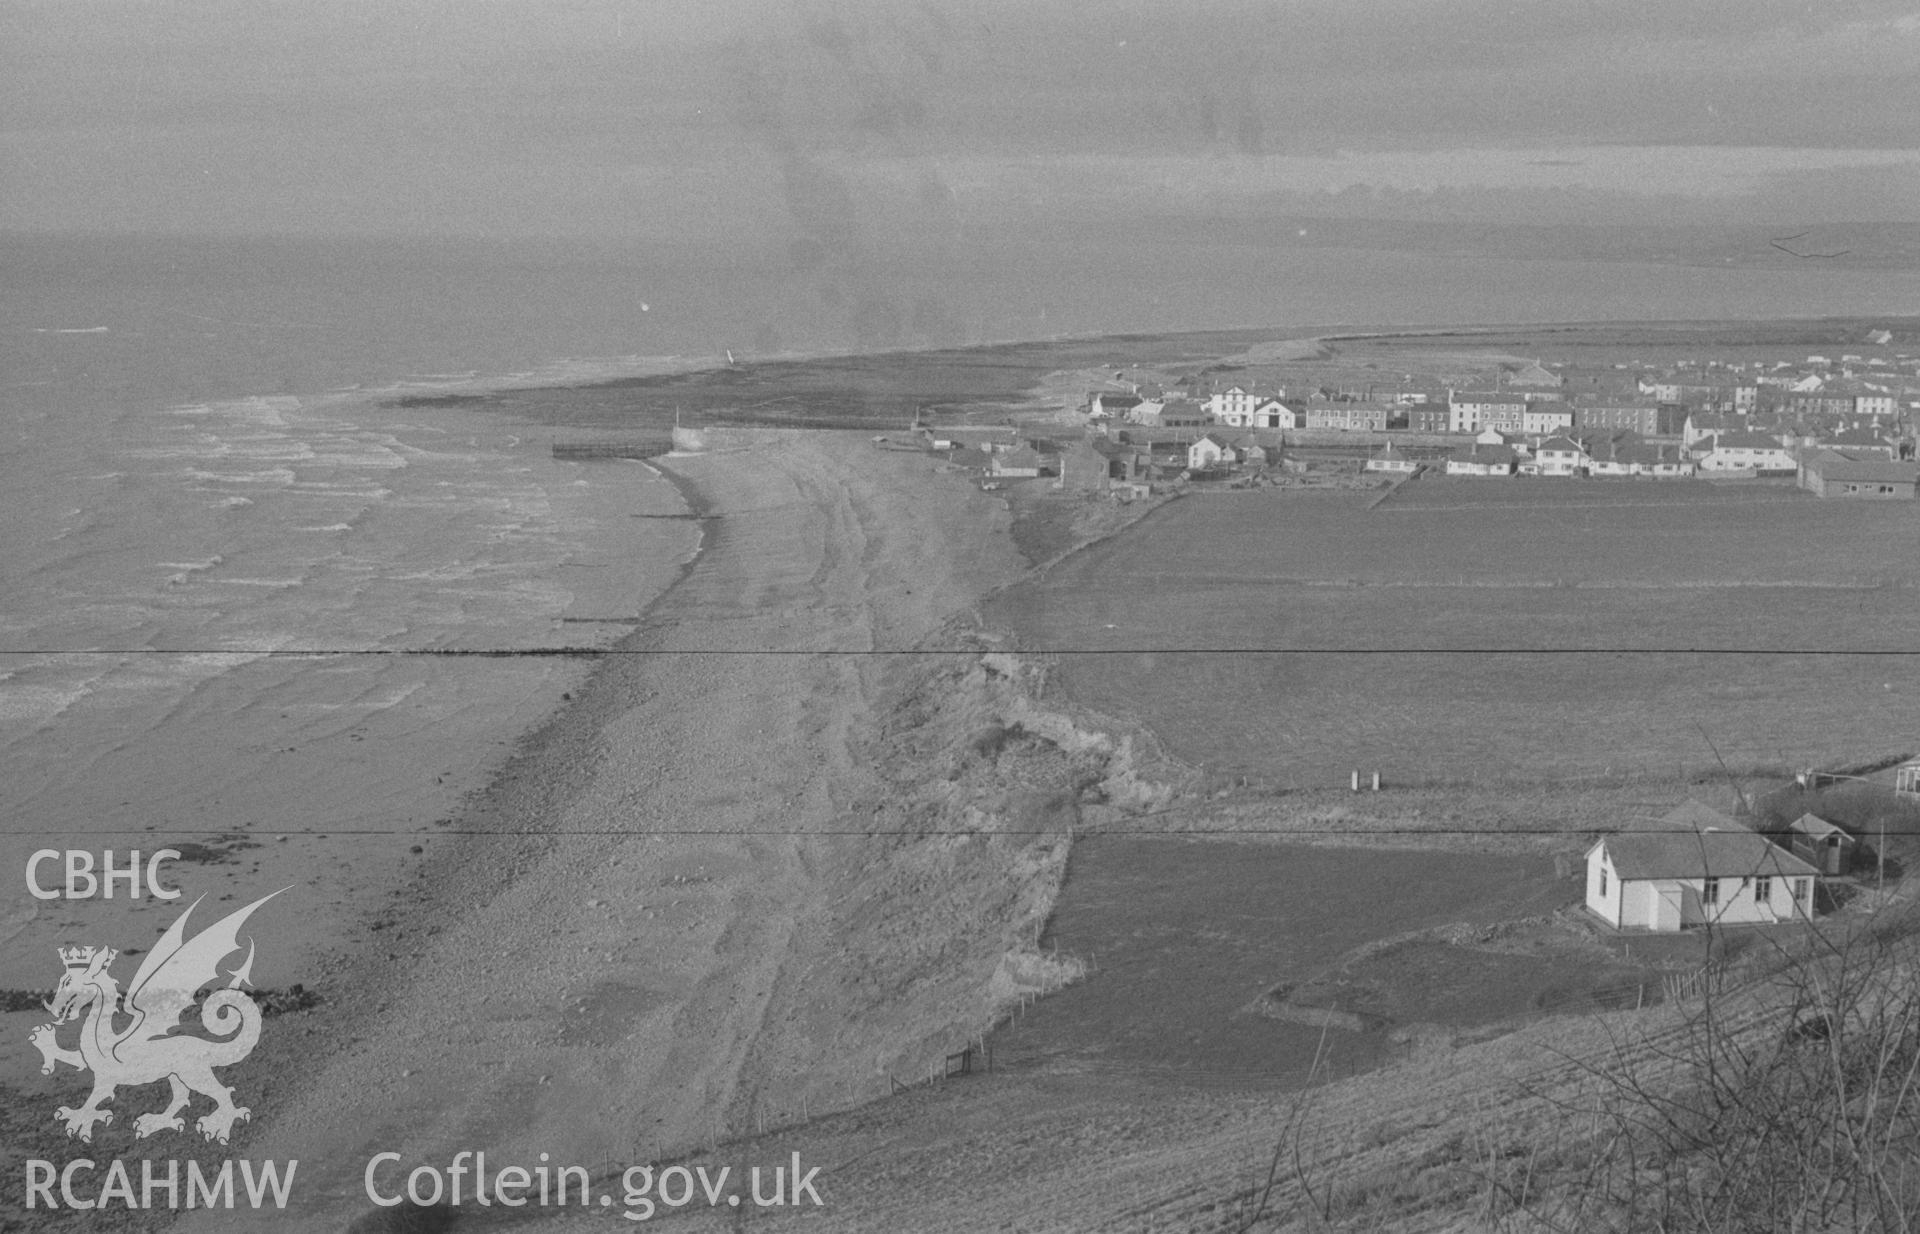 Digital copy of a black and white negative showing view of Aberaeron town and beach from bend in the main road. Photographed in April 1963 by Arthur O. Chater from Grid Reference SN 450 625, looking north east.